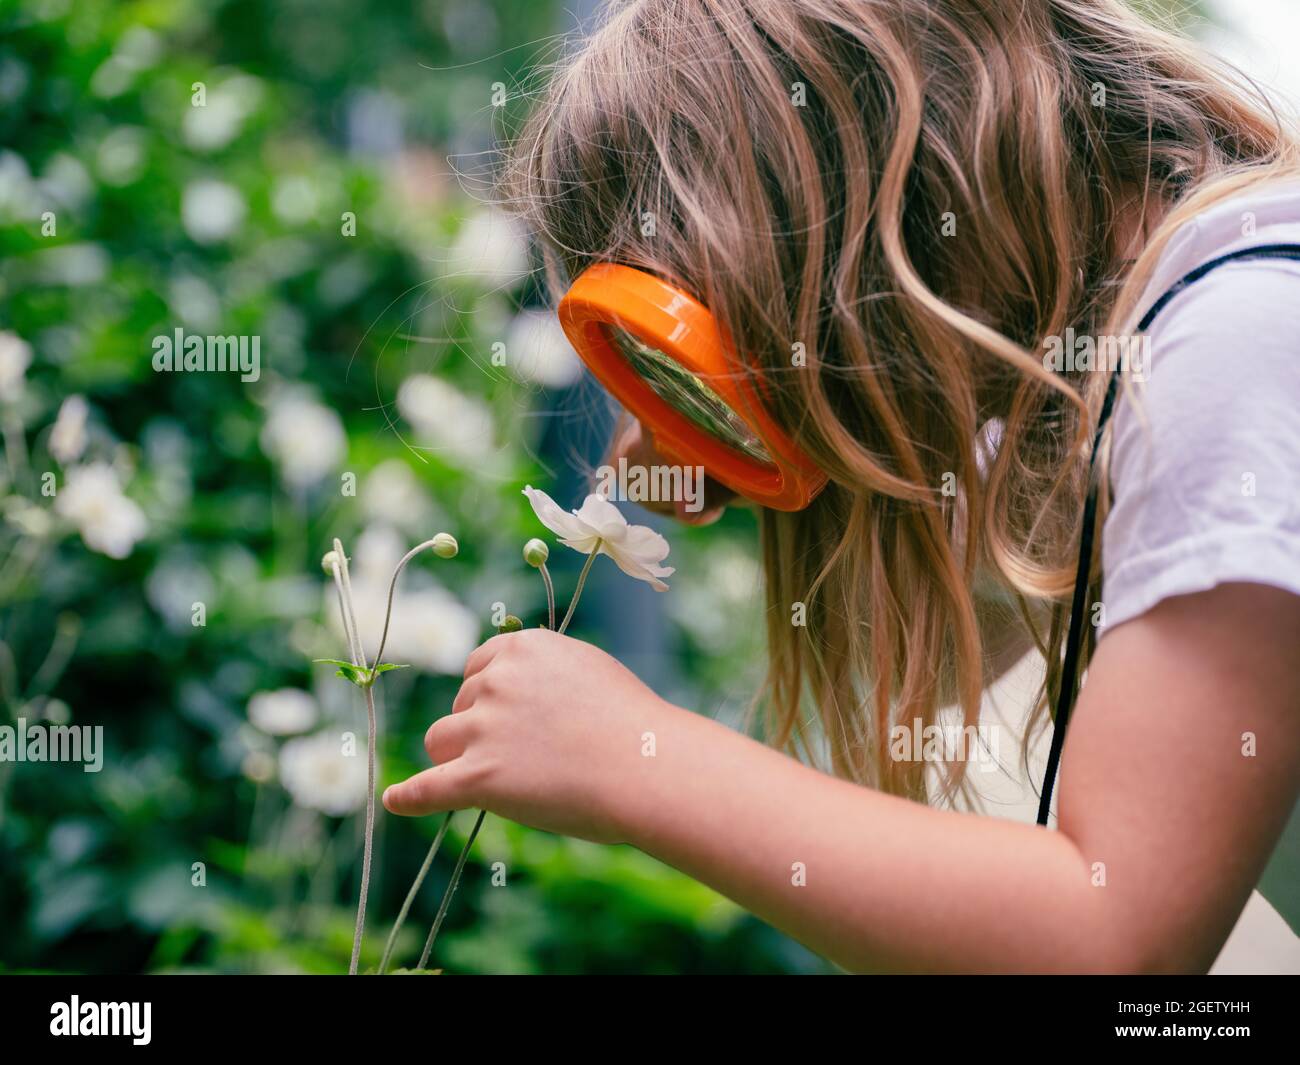 Child using a large child-friendly magnifying glass to look at a flower. Stock Photo